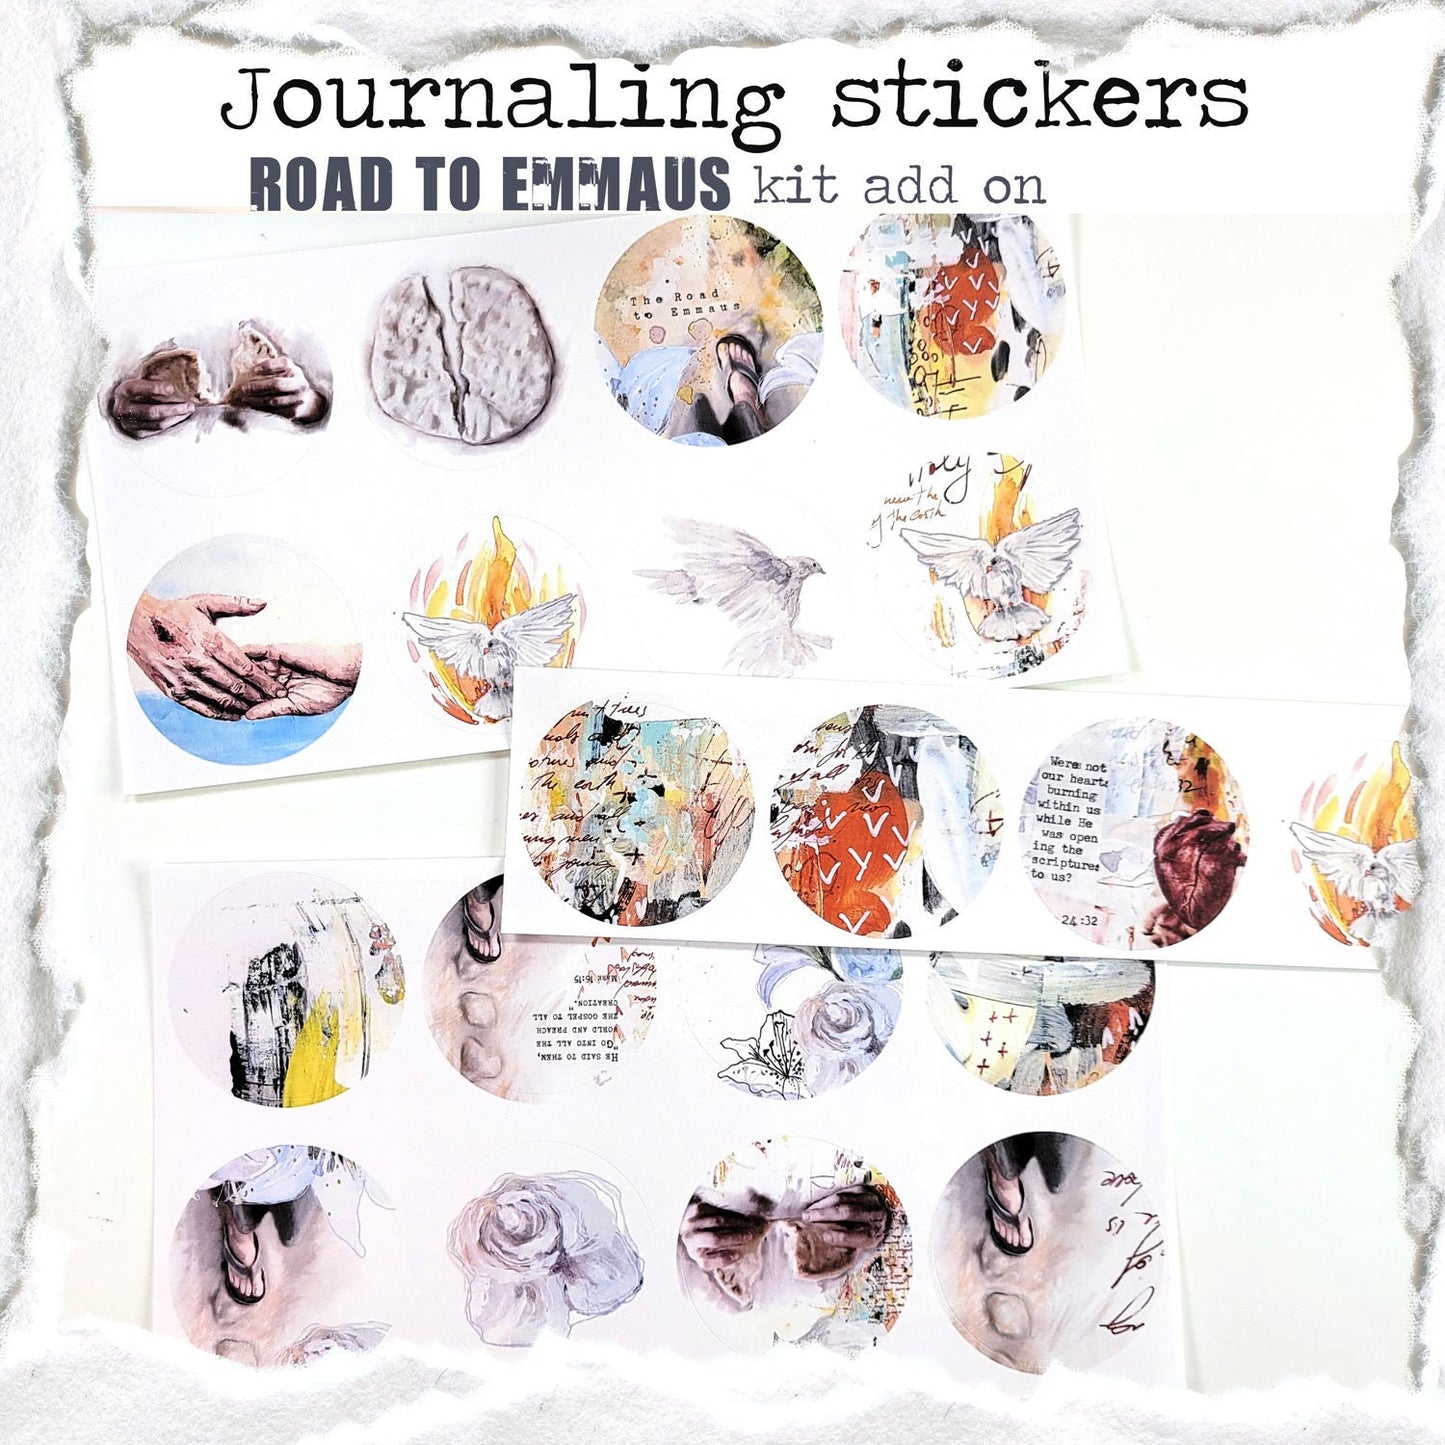 Road to Emmaus- ADD ON 20 journaling stickers